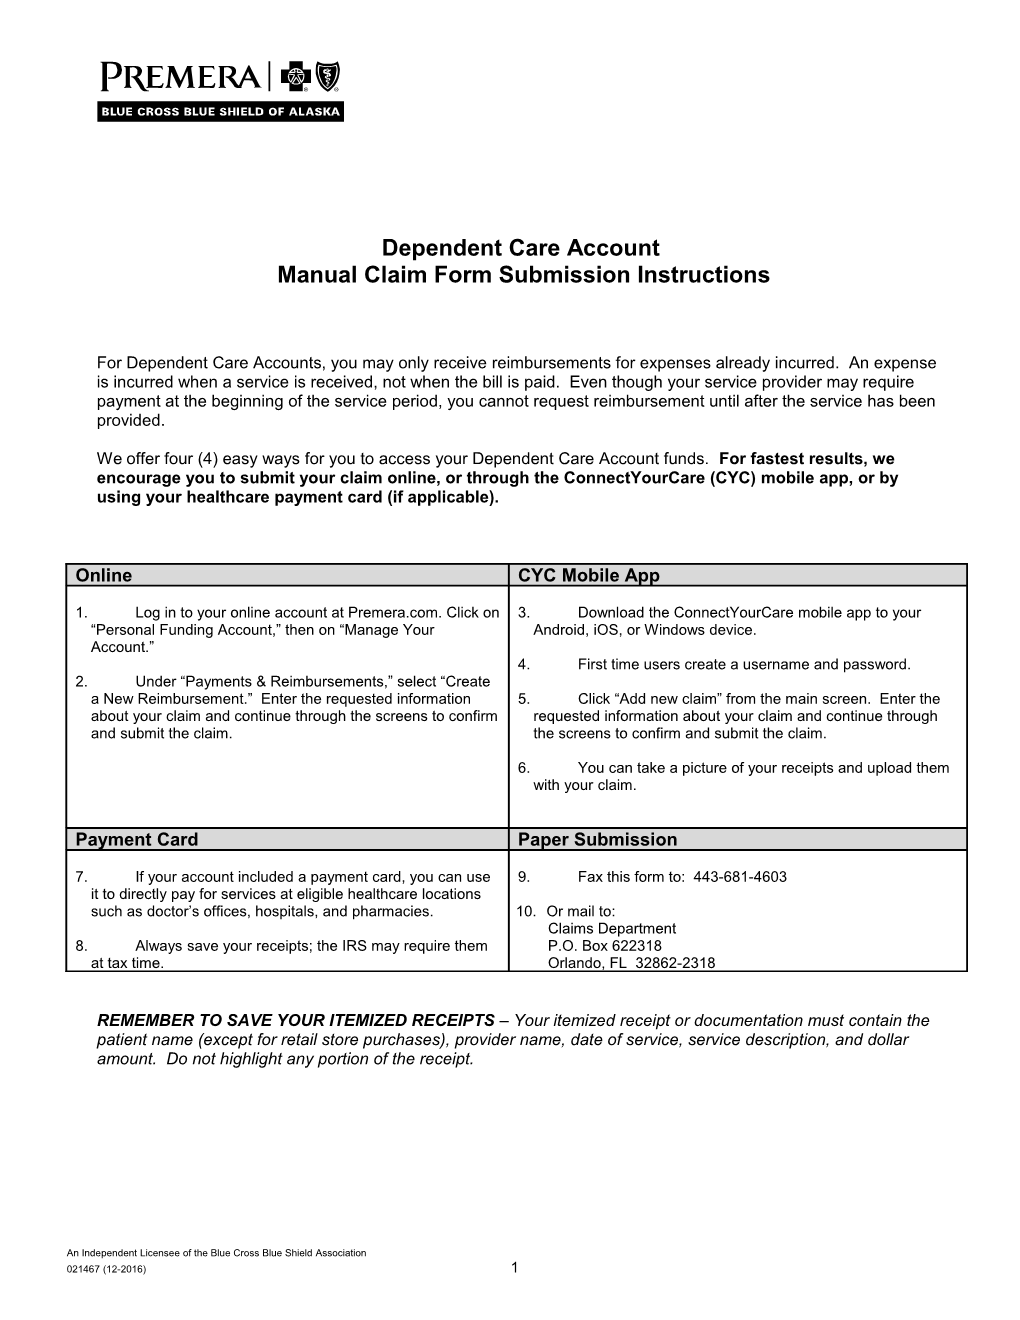 Dependent Care Account Claim Form